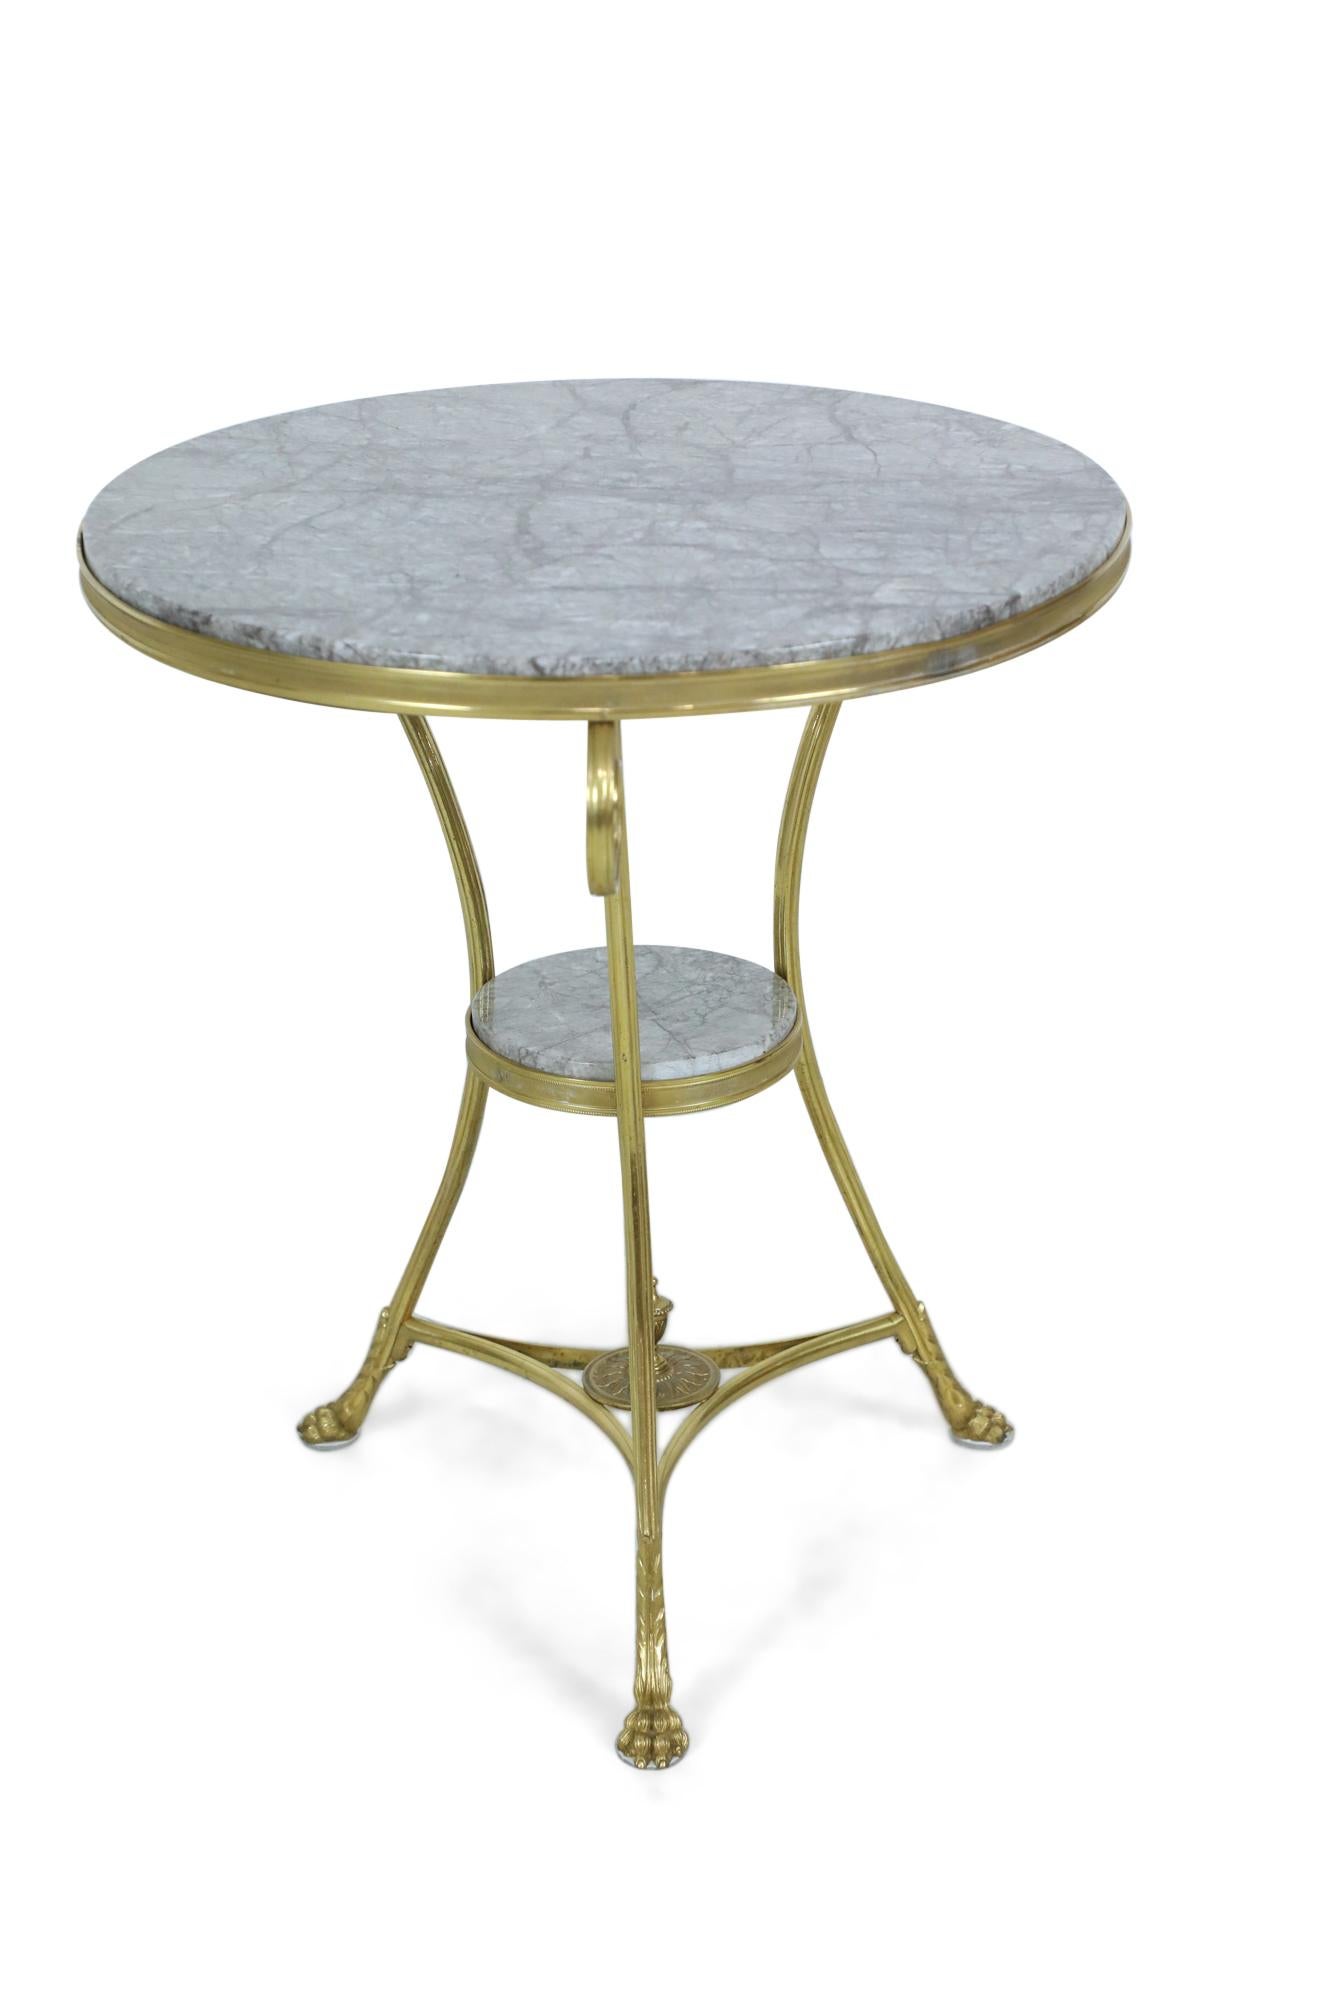 French Charles X-style bronze gueridon / side table with a grey circular inset marble top and shelf and a bottom stretcher with decorative finial connecting 3 scroll legs ending in hoof shaped feet.